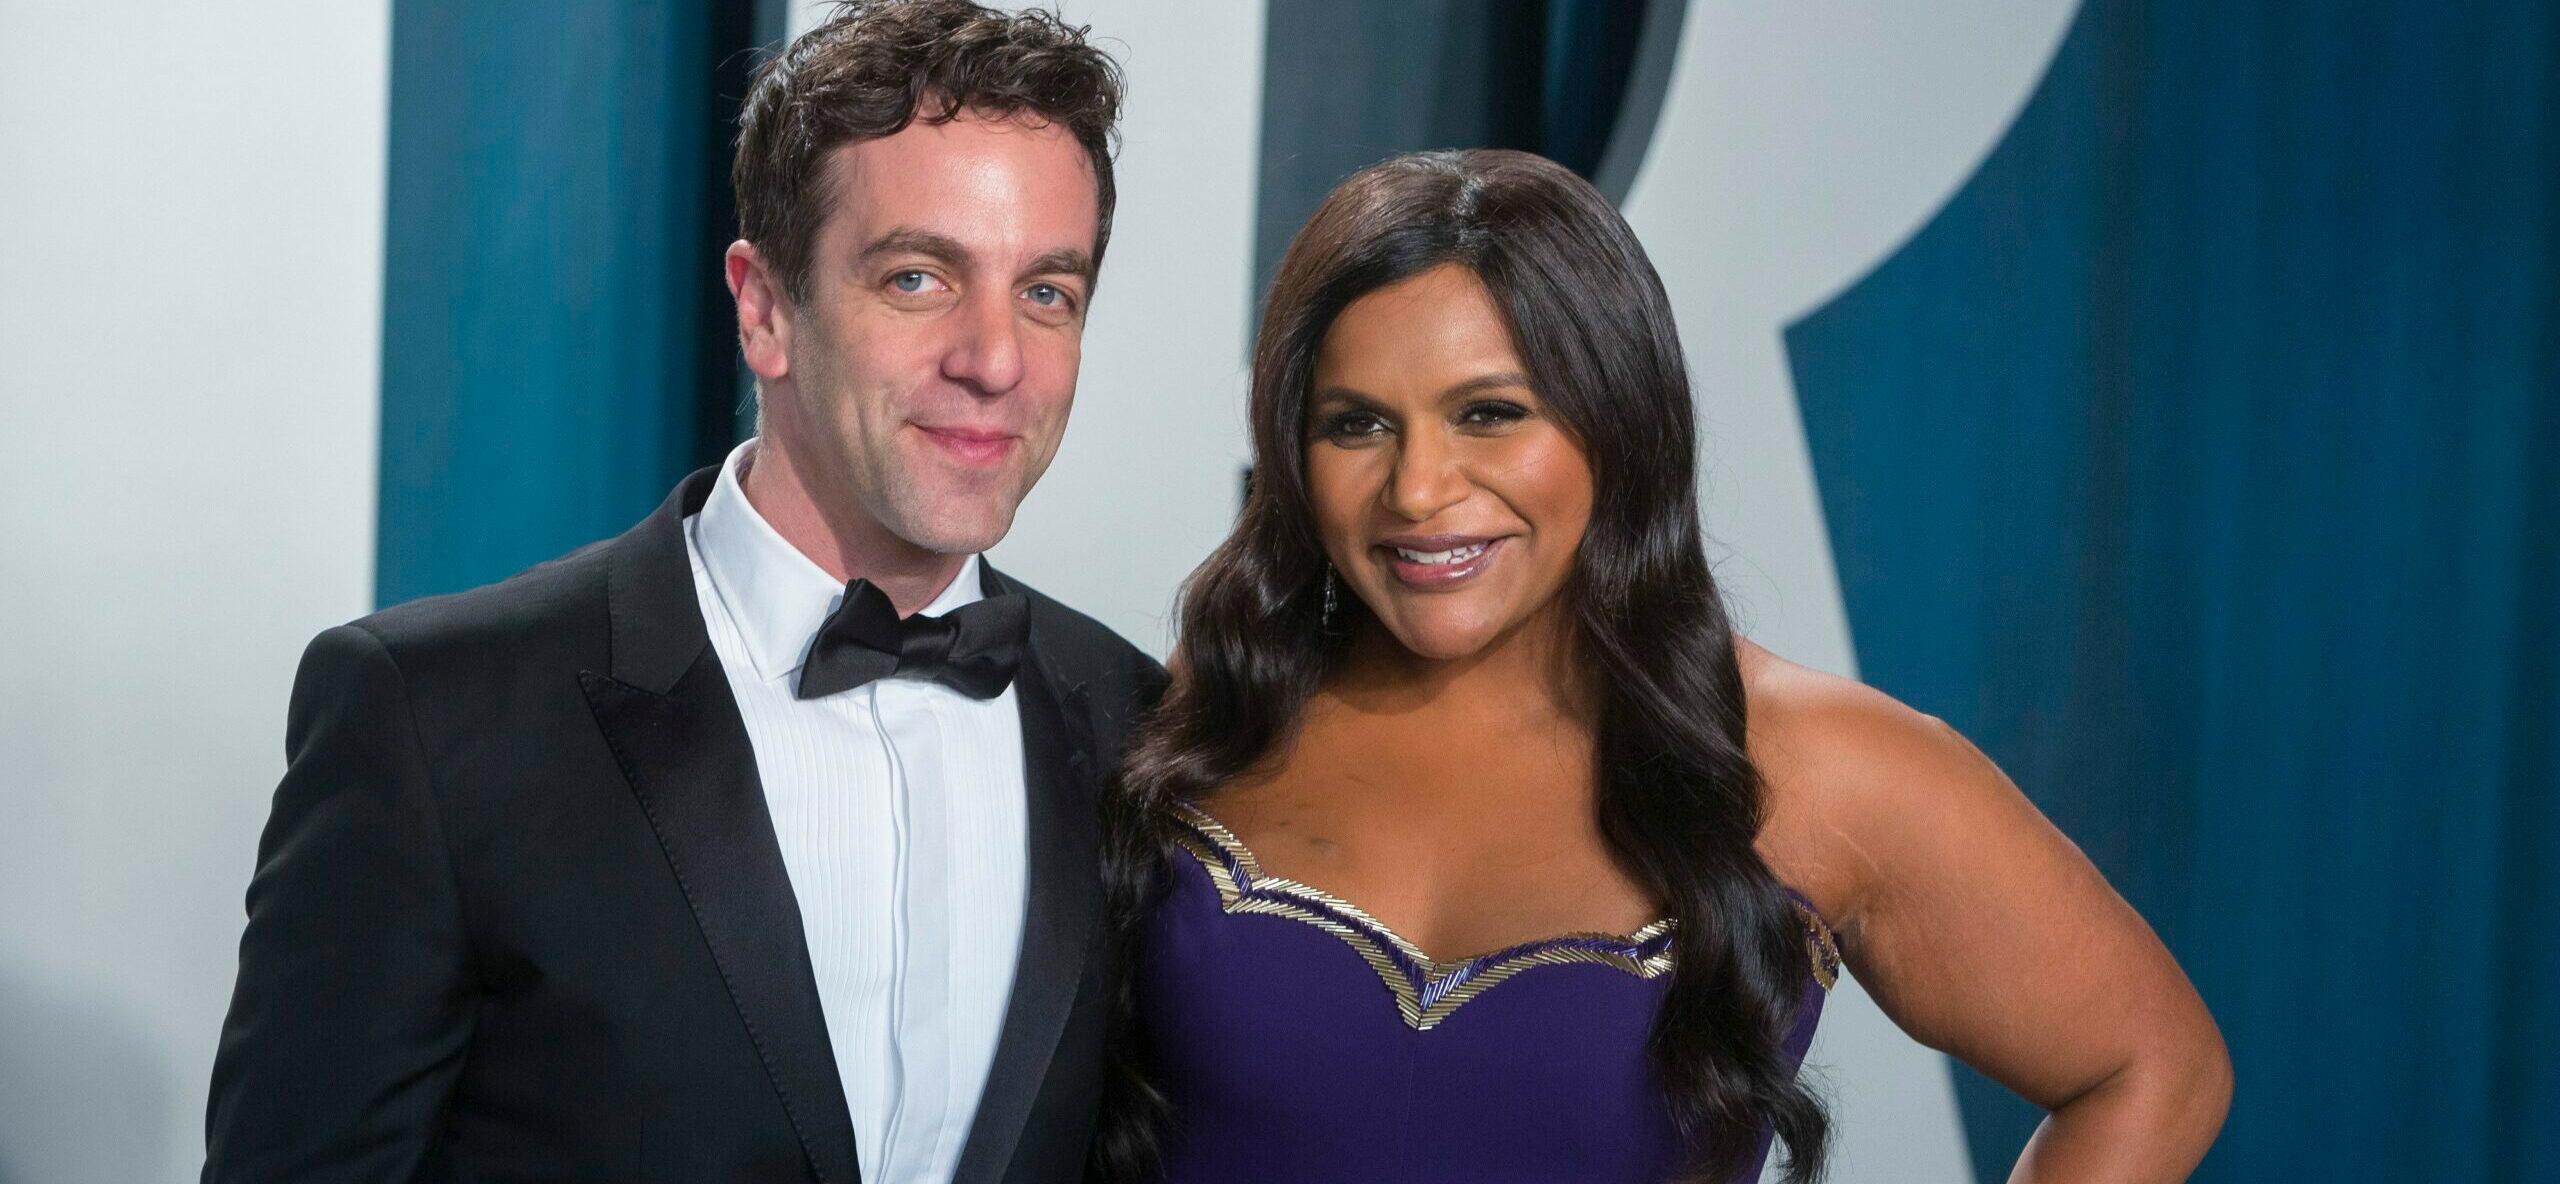 Mindy Kaling Explains Why She Won’t Date B.J. Novak: ‘He’s Really Part Of Our Family’